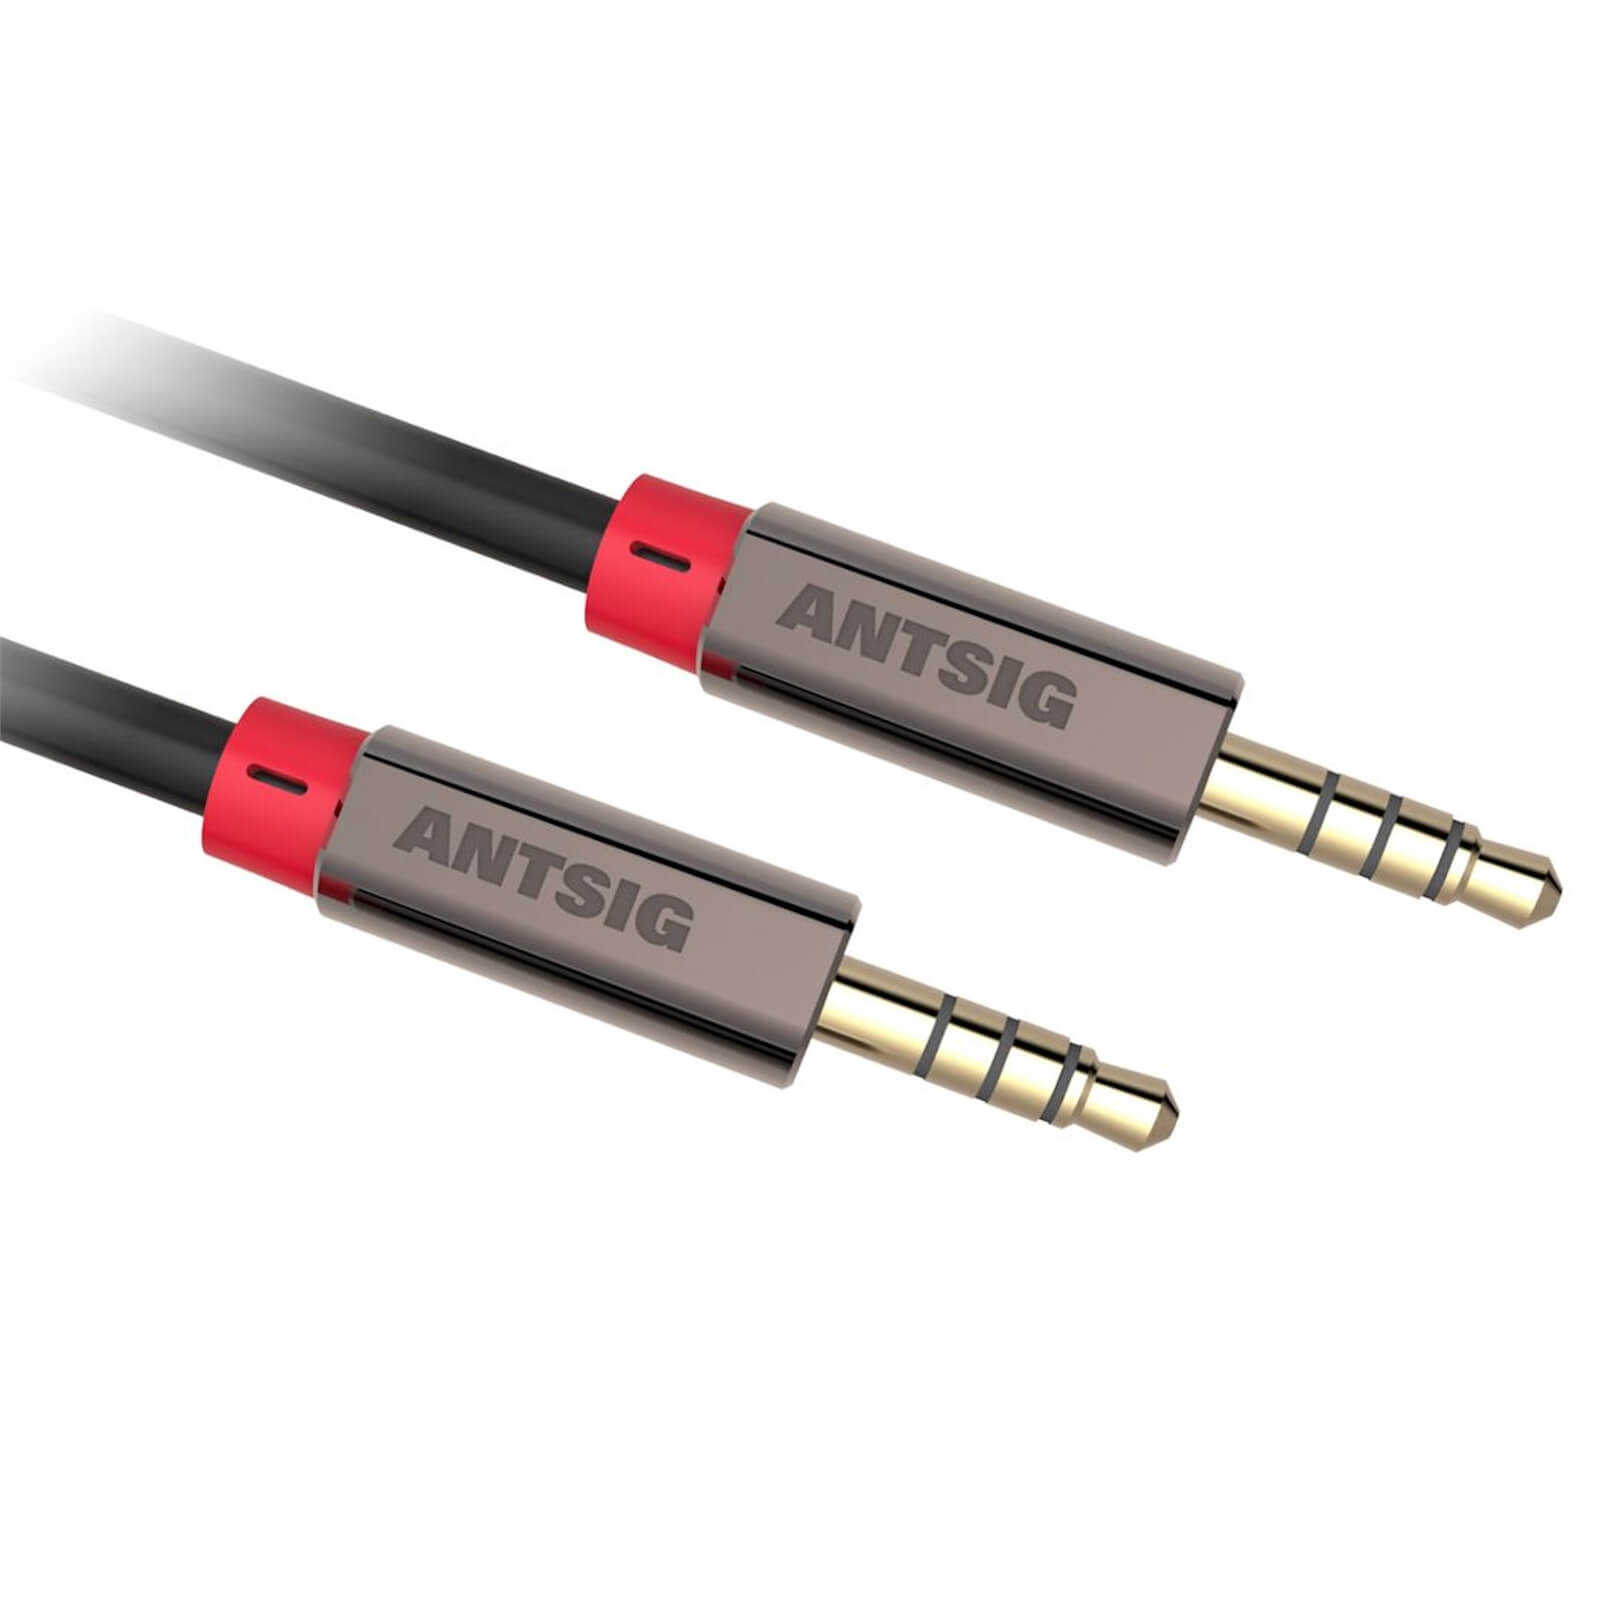 Photo of Antsig 3.5mm Male To Male Audio Cable 1.5m